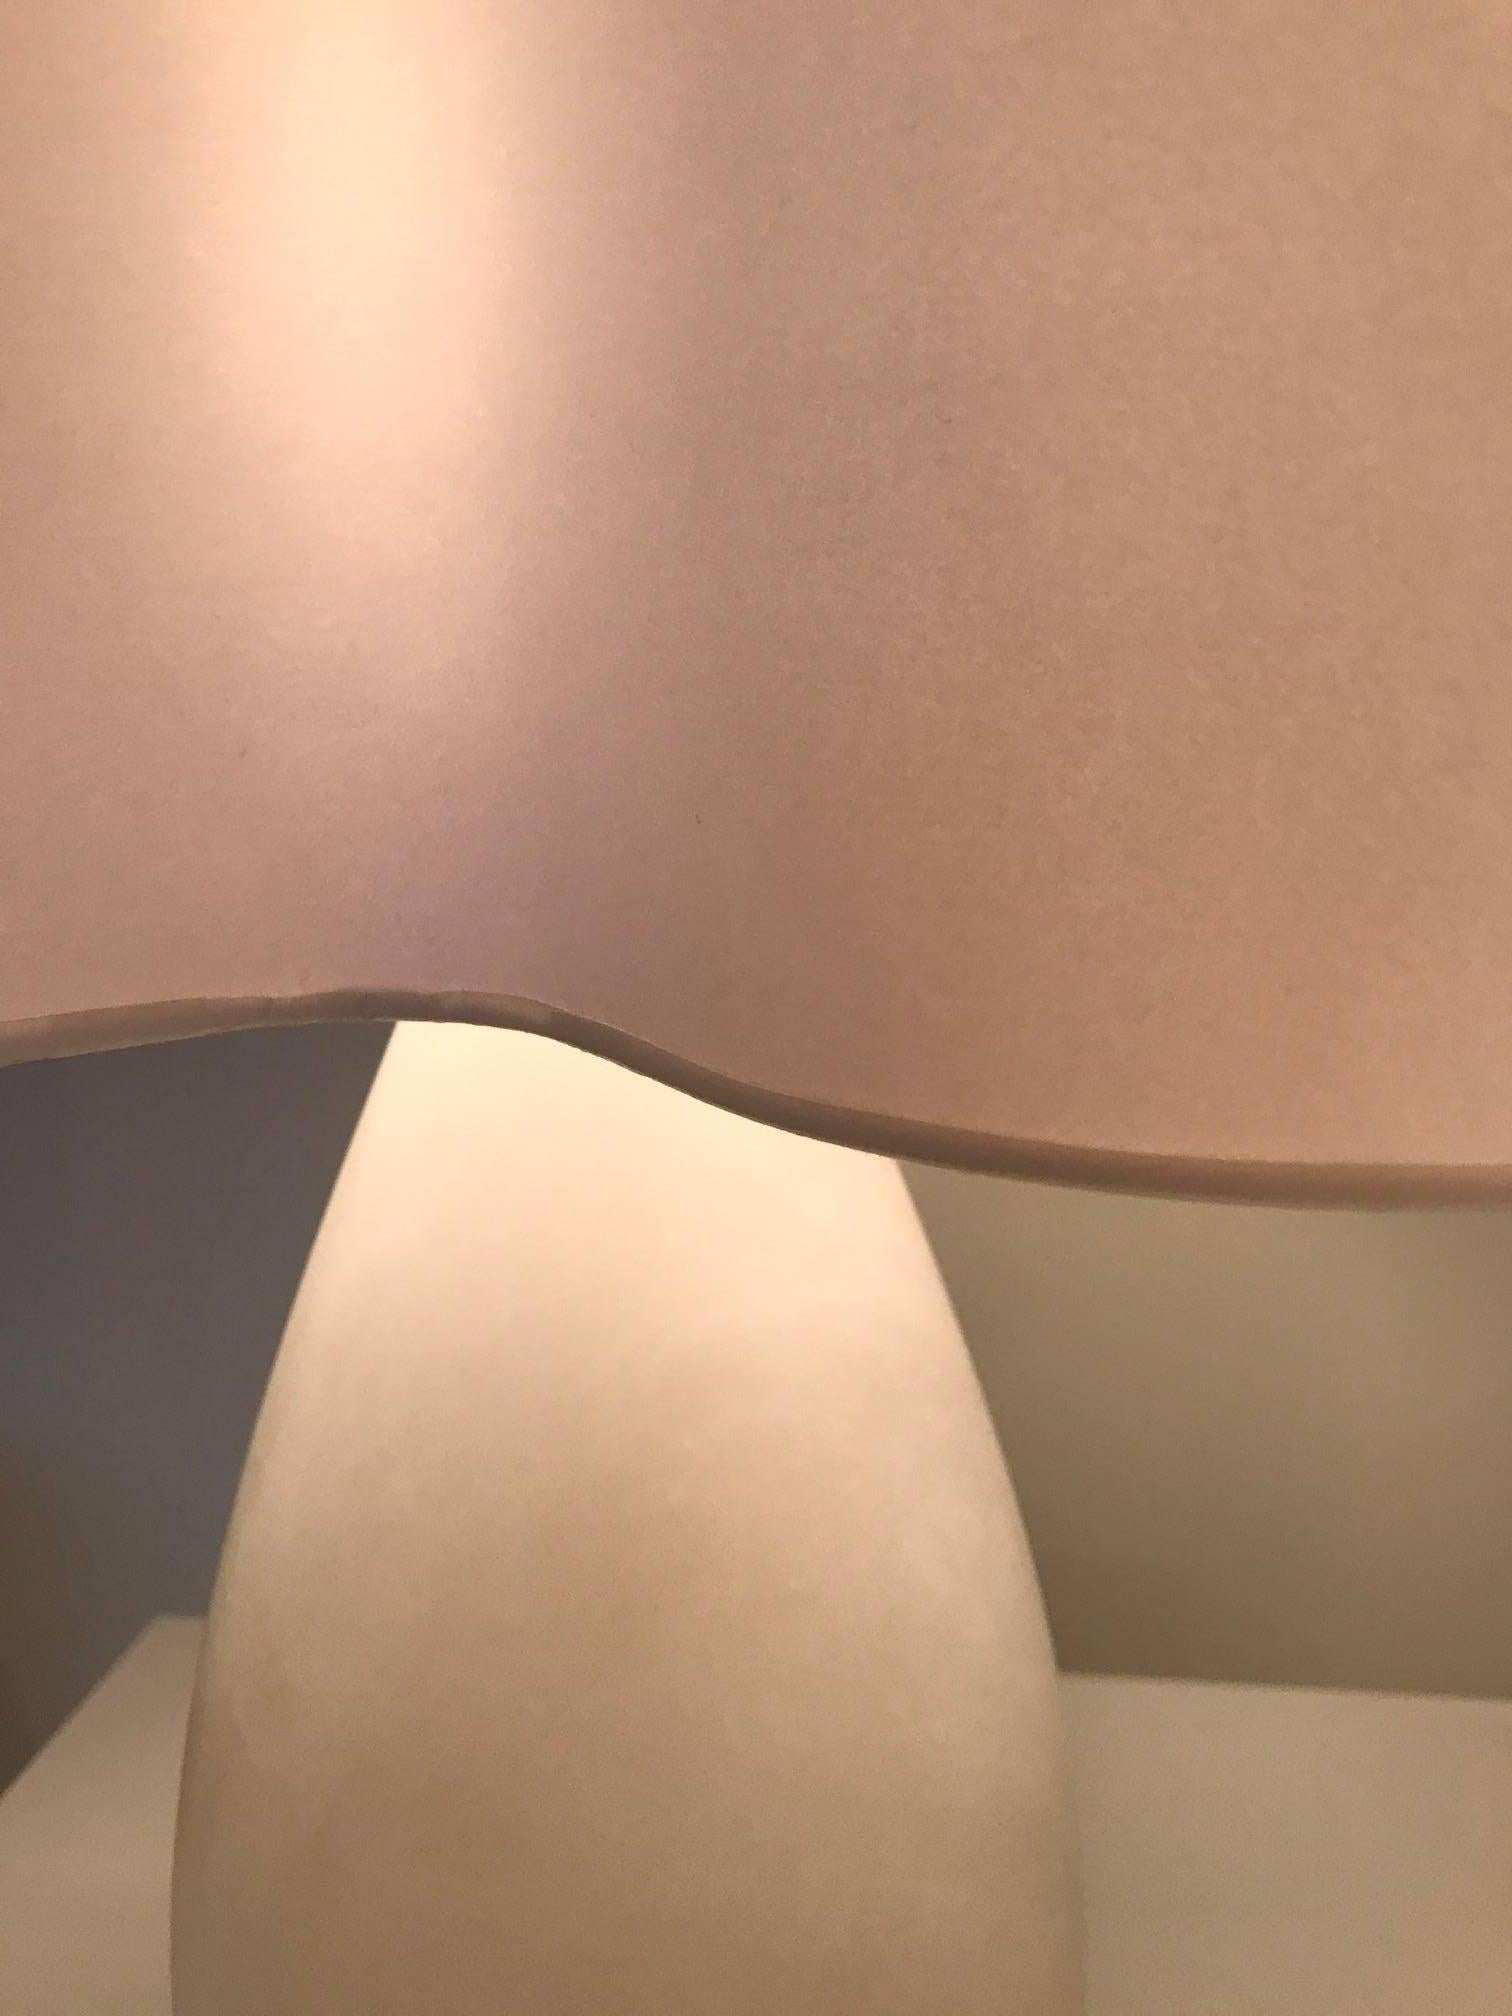 Cover Table Lamp in Alabaster by Jullien Barrault In Excellent Condition For Sale In New York, NY